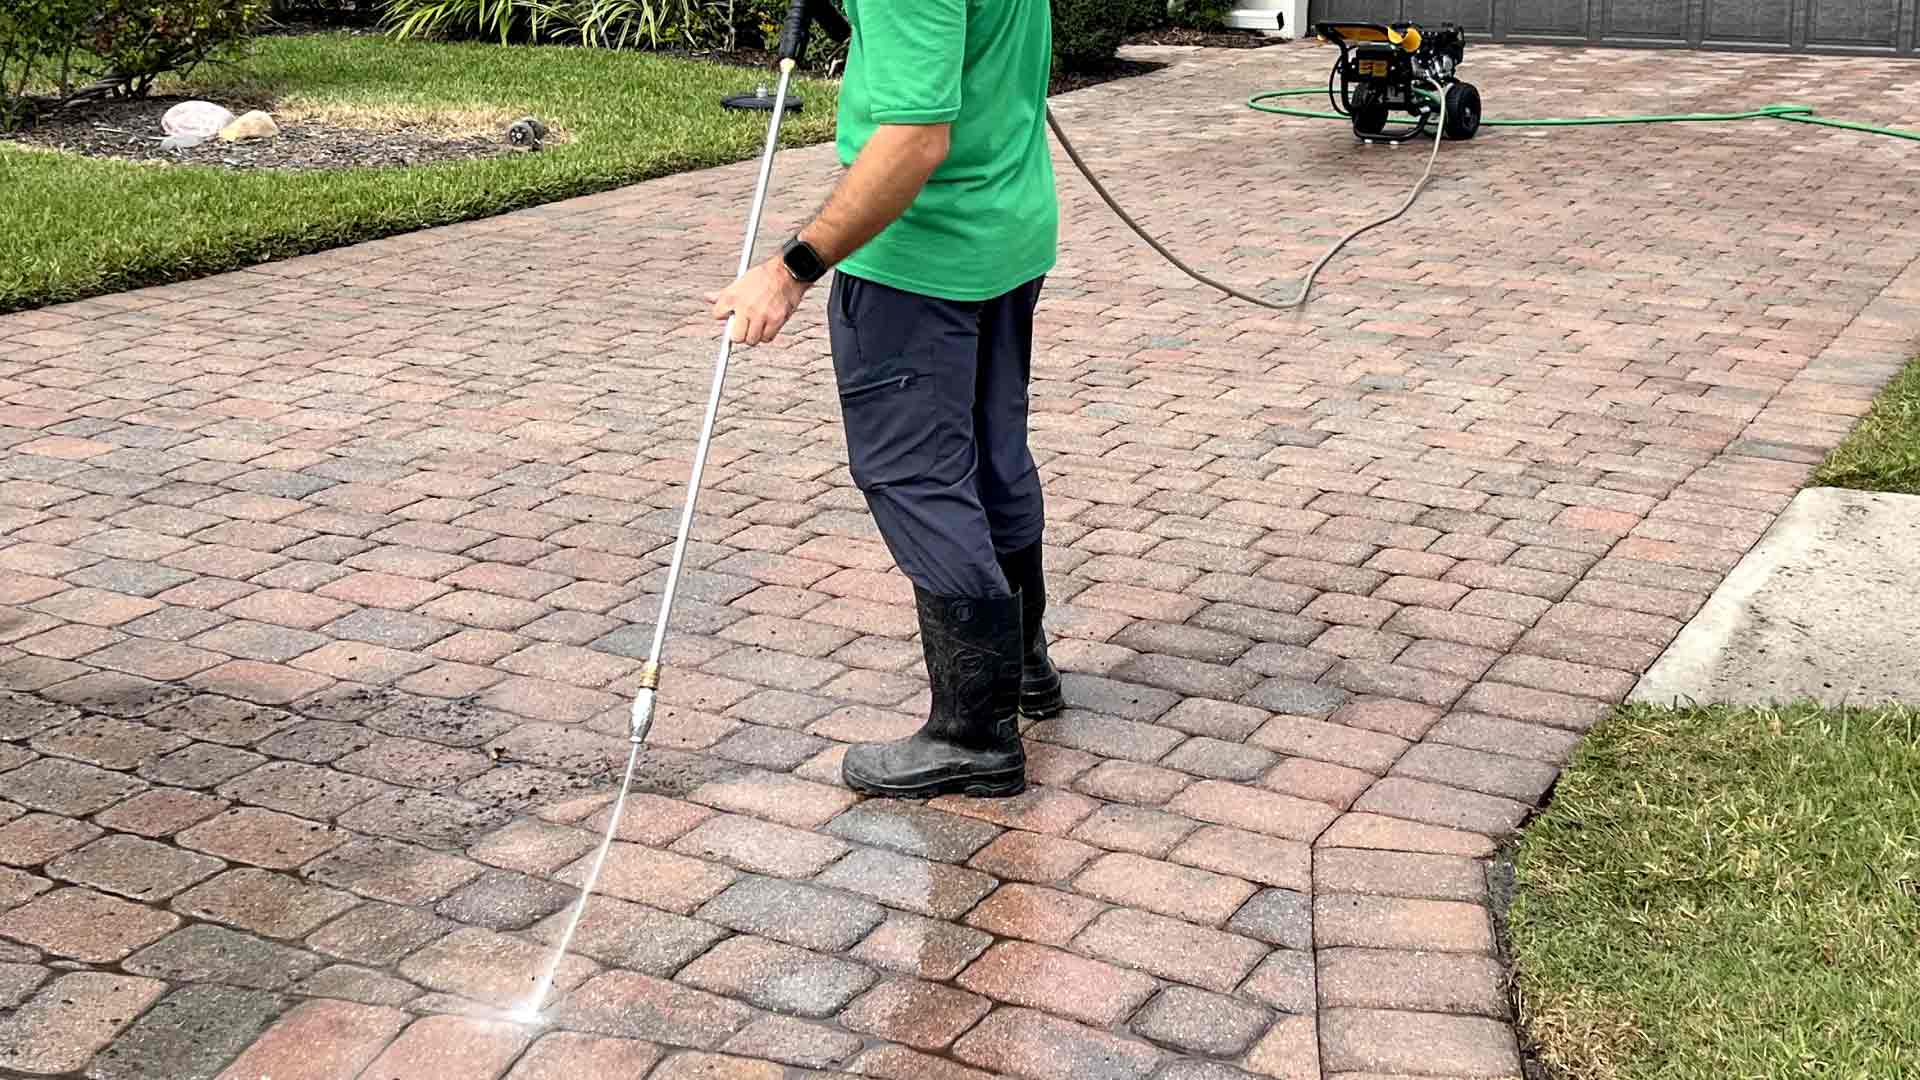 Pressure washing and window cleaning – Apr 27